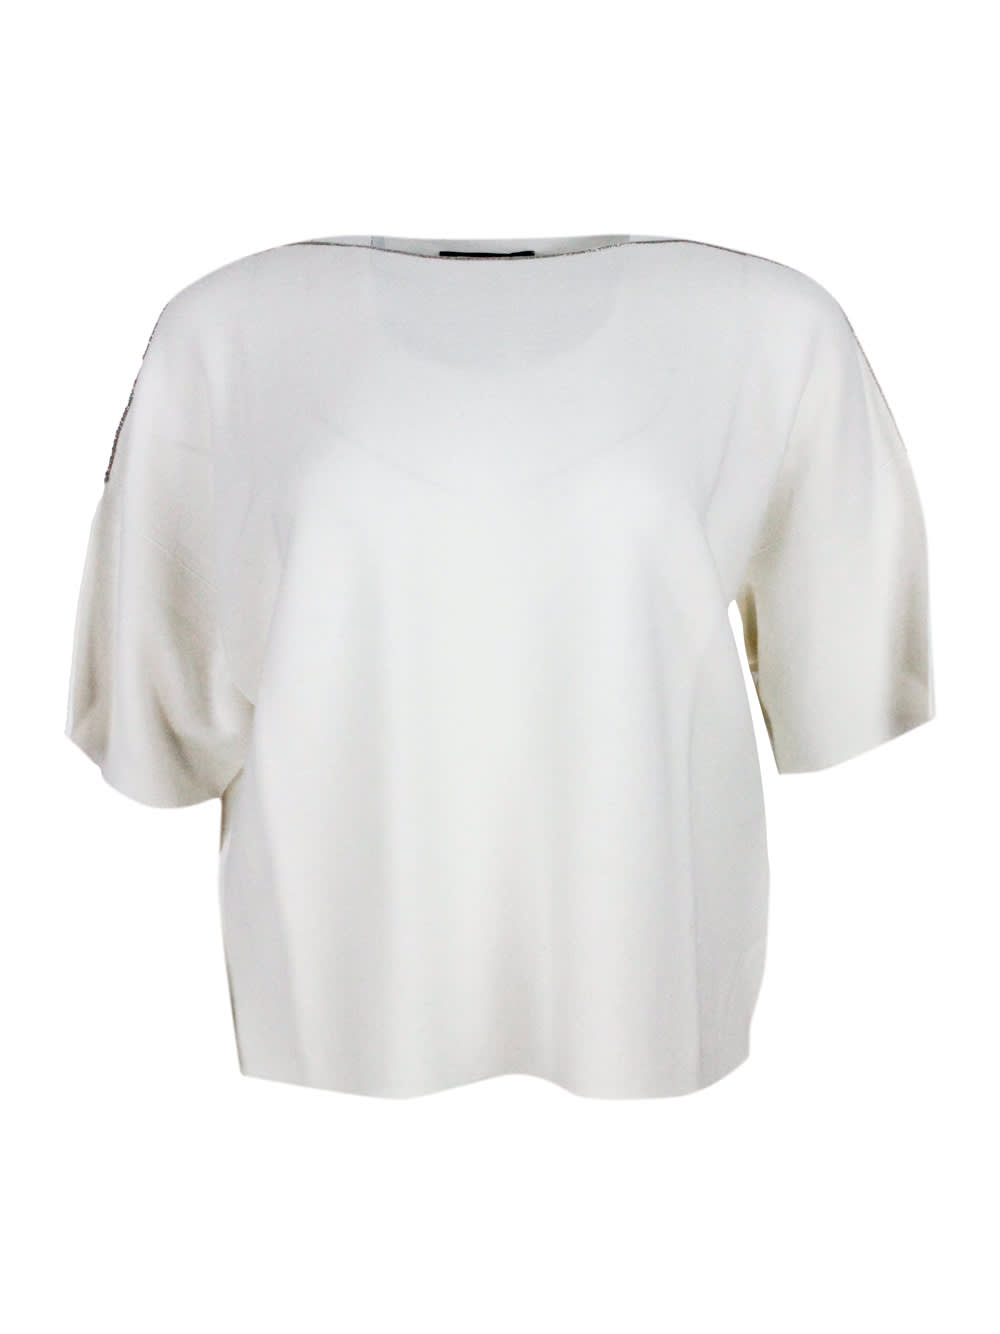 Short-sleeved Cotton Shirt With Horizontal Workmanship With Boat Neckline Embellished With Rows Of Jewels On The Neck